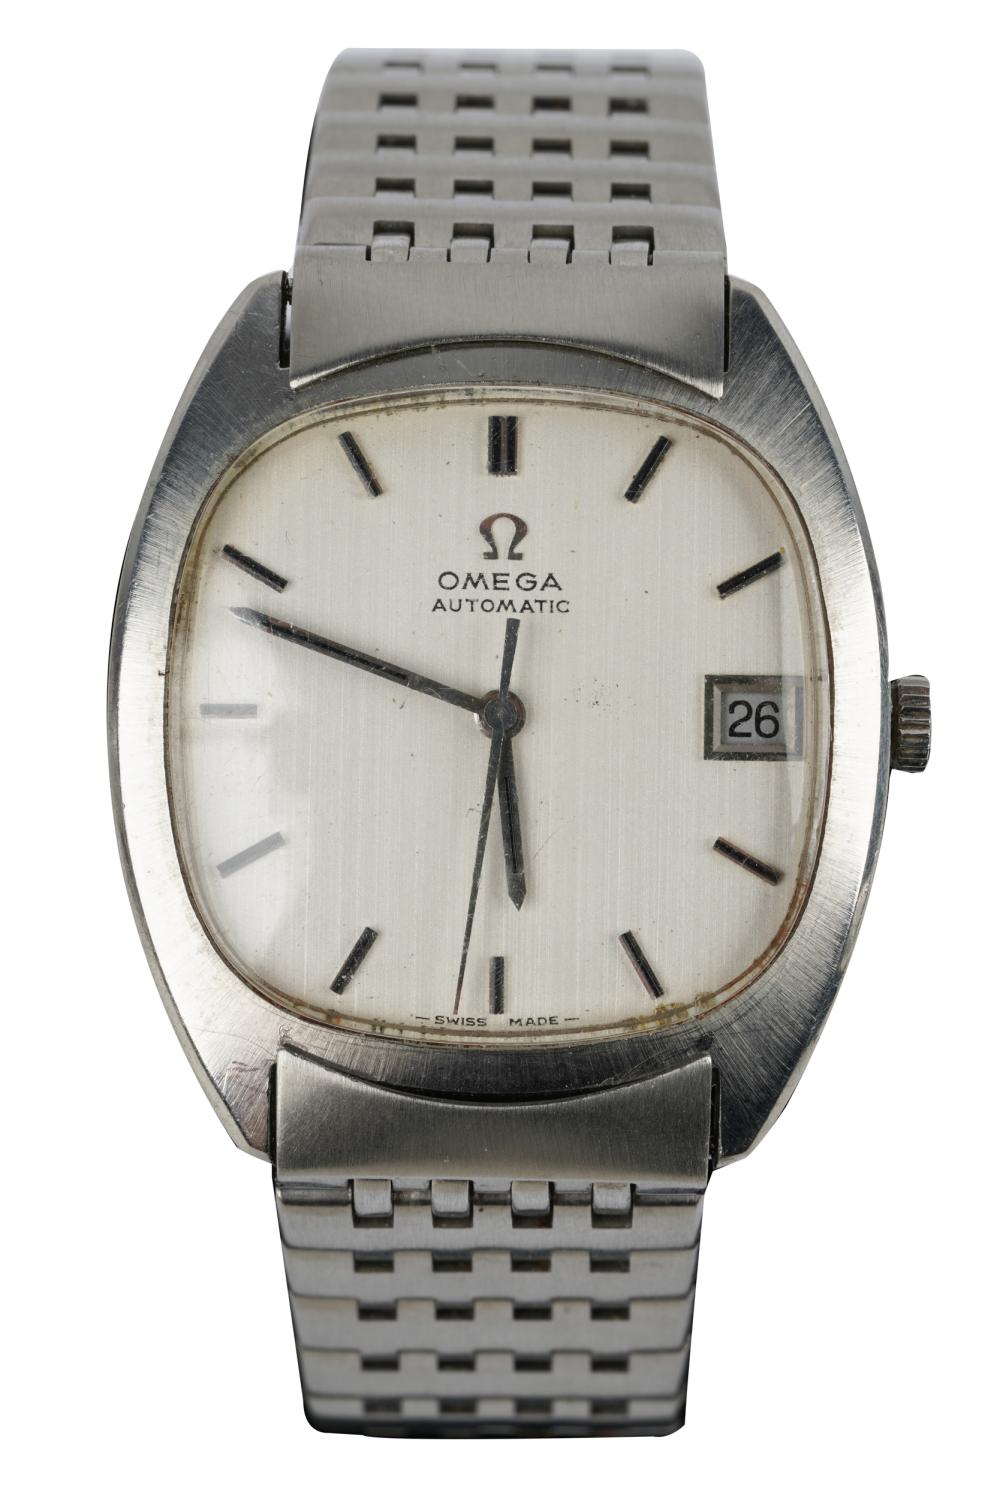 OMEGA STAINLESS STEEL AUTOMATIC 333d6c